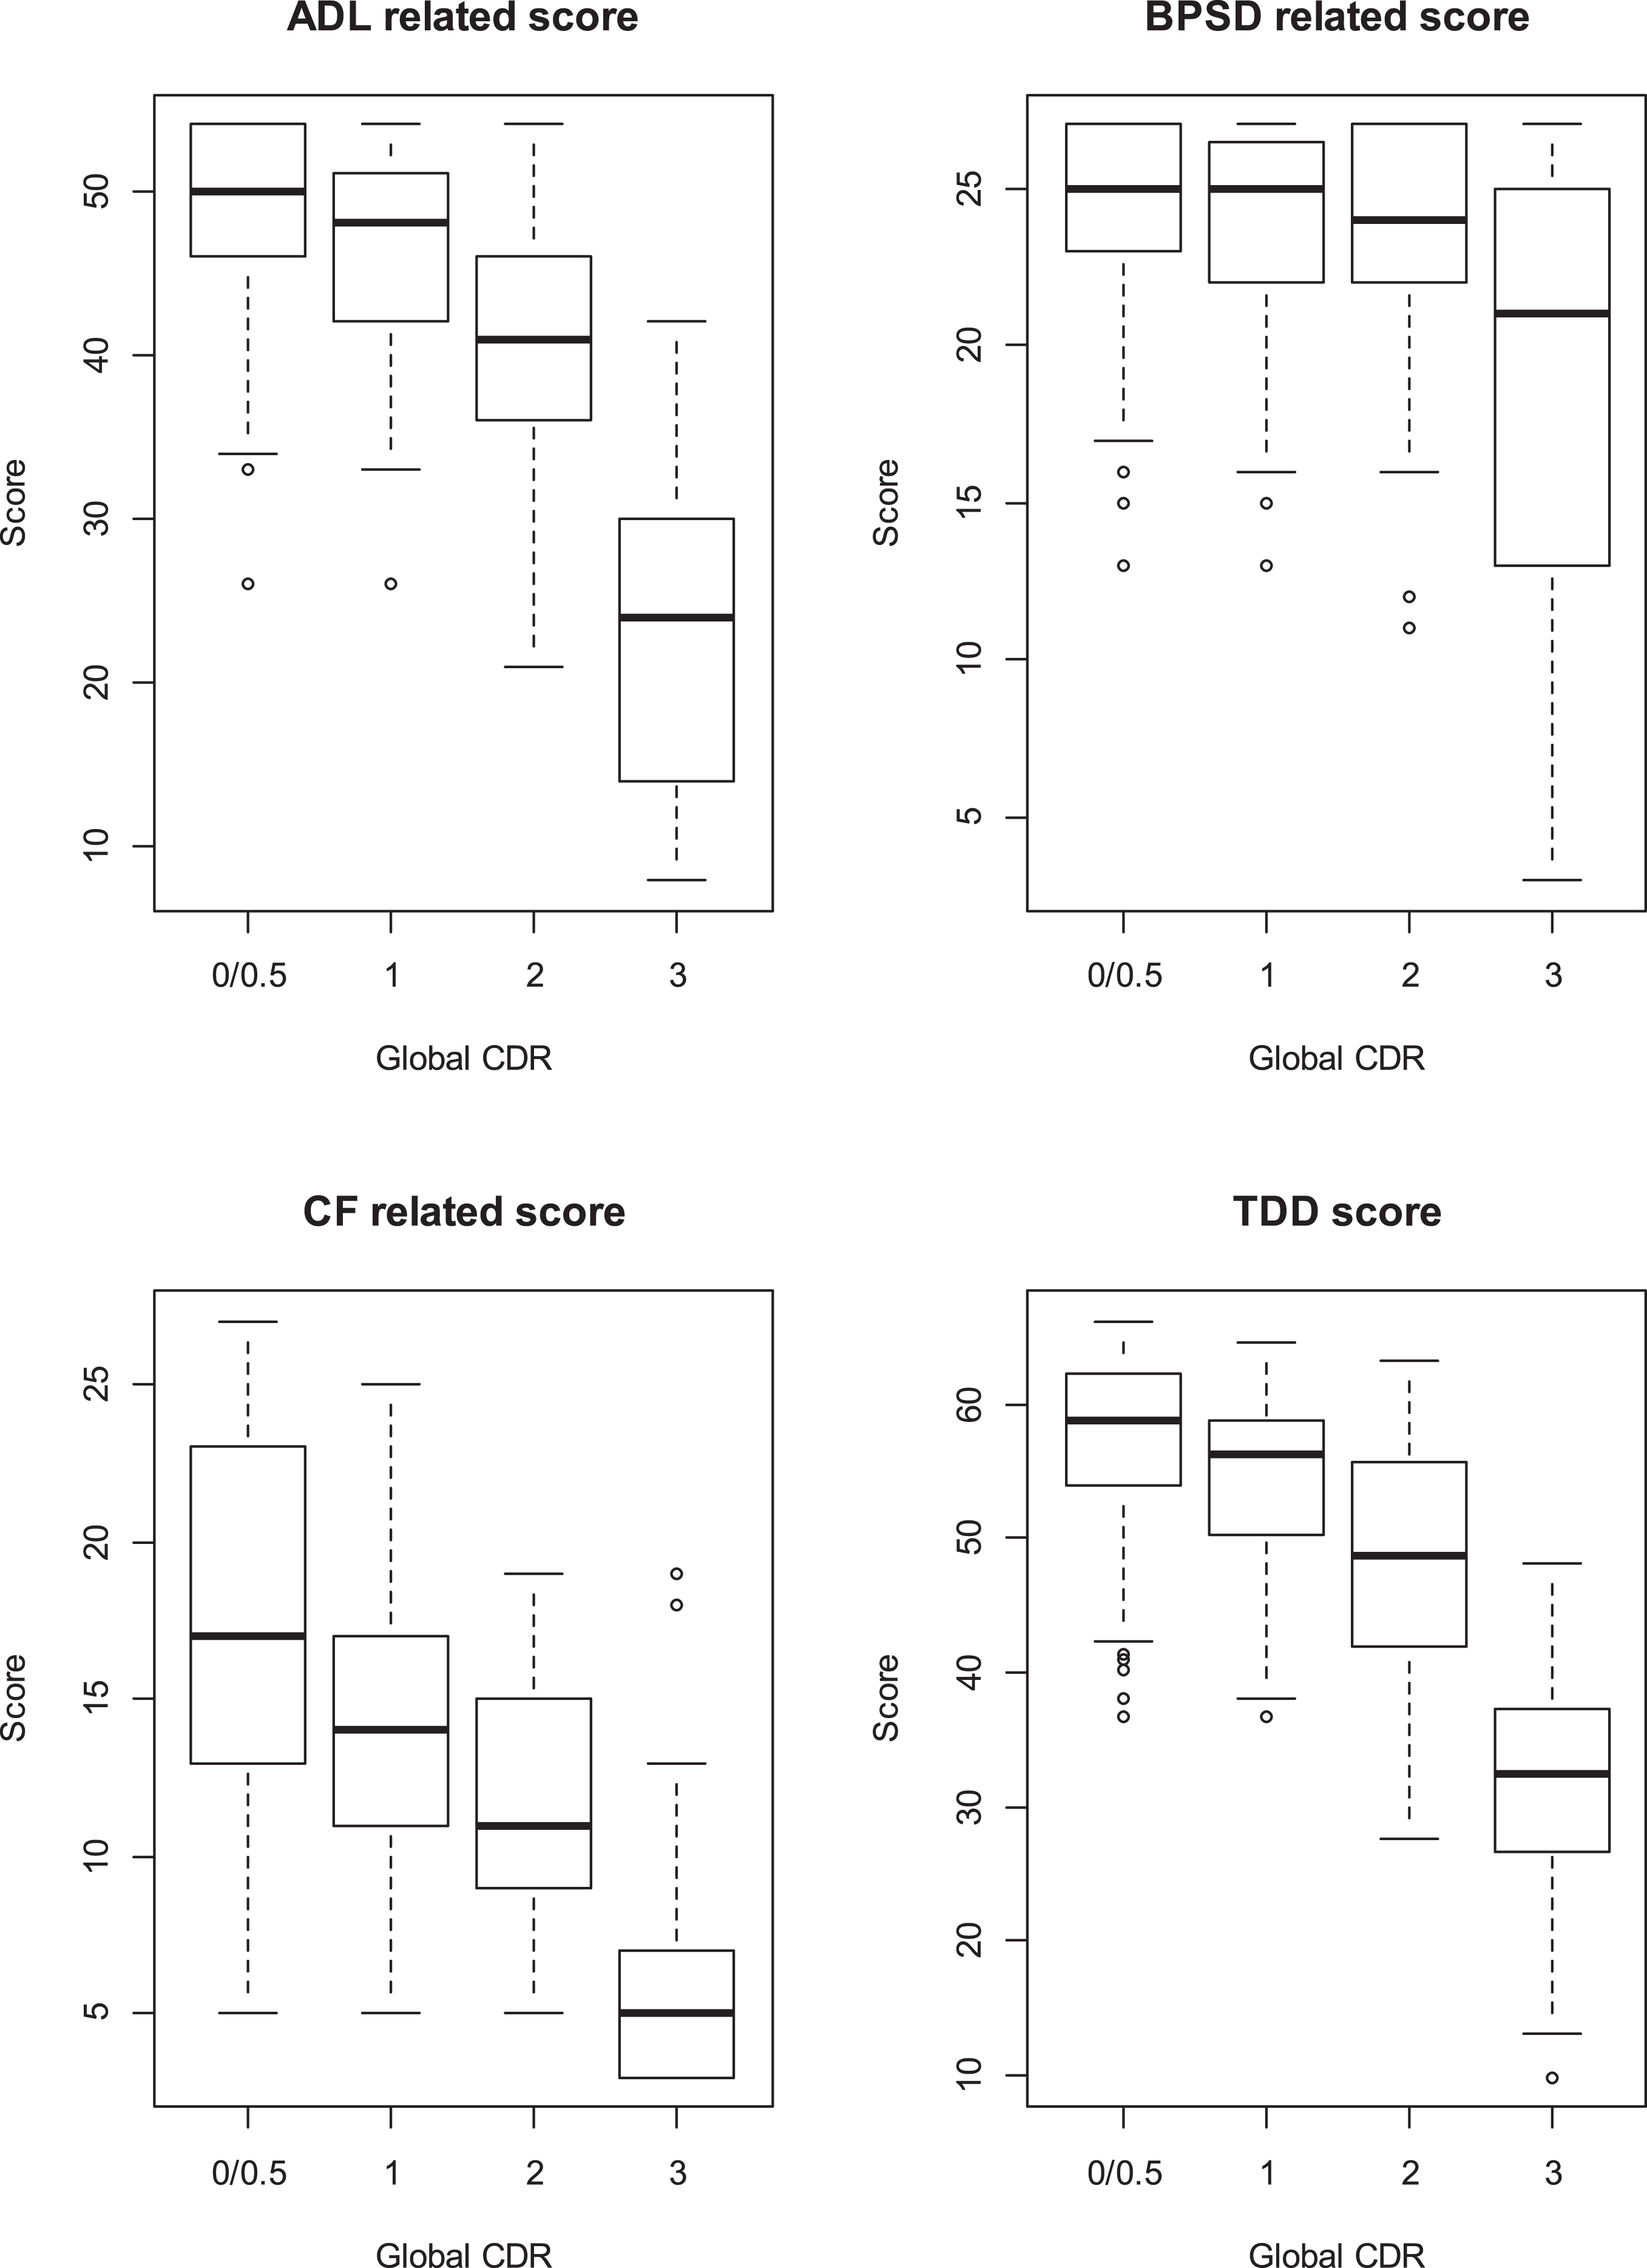 Box plots for ADL, BPSD, and CF domains scores, and TDD scores of ABC-DS that we measured at baseline in TRIAD1412 study. We showed the plots per Global CDR at baseline.